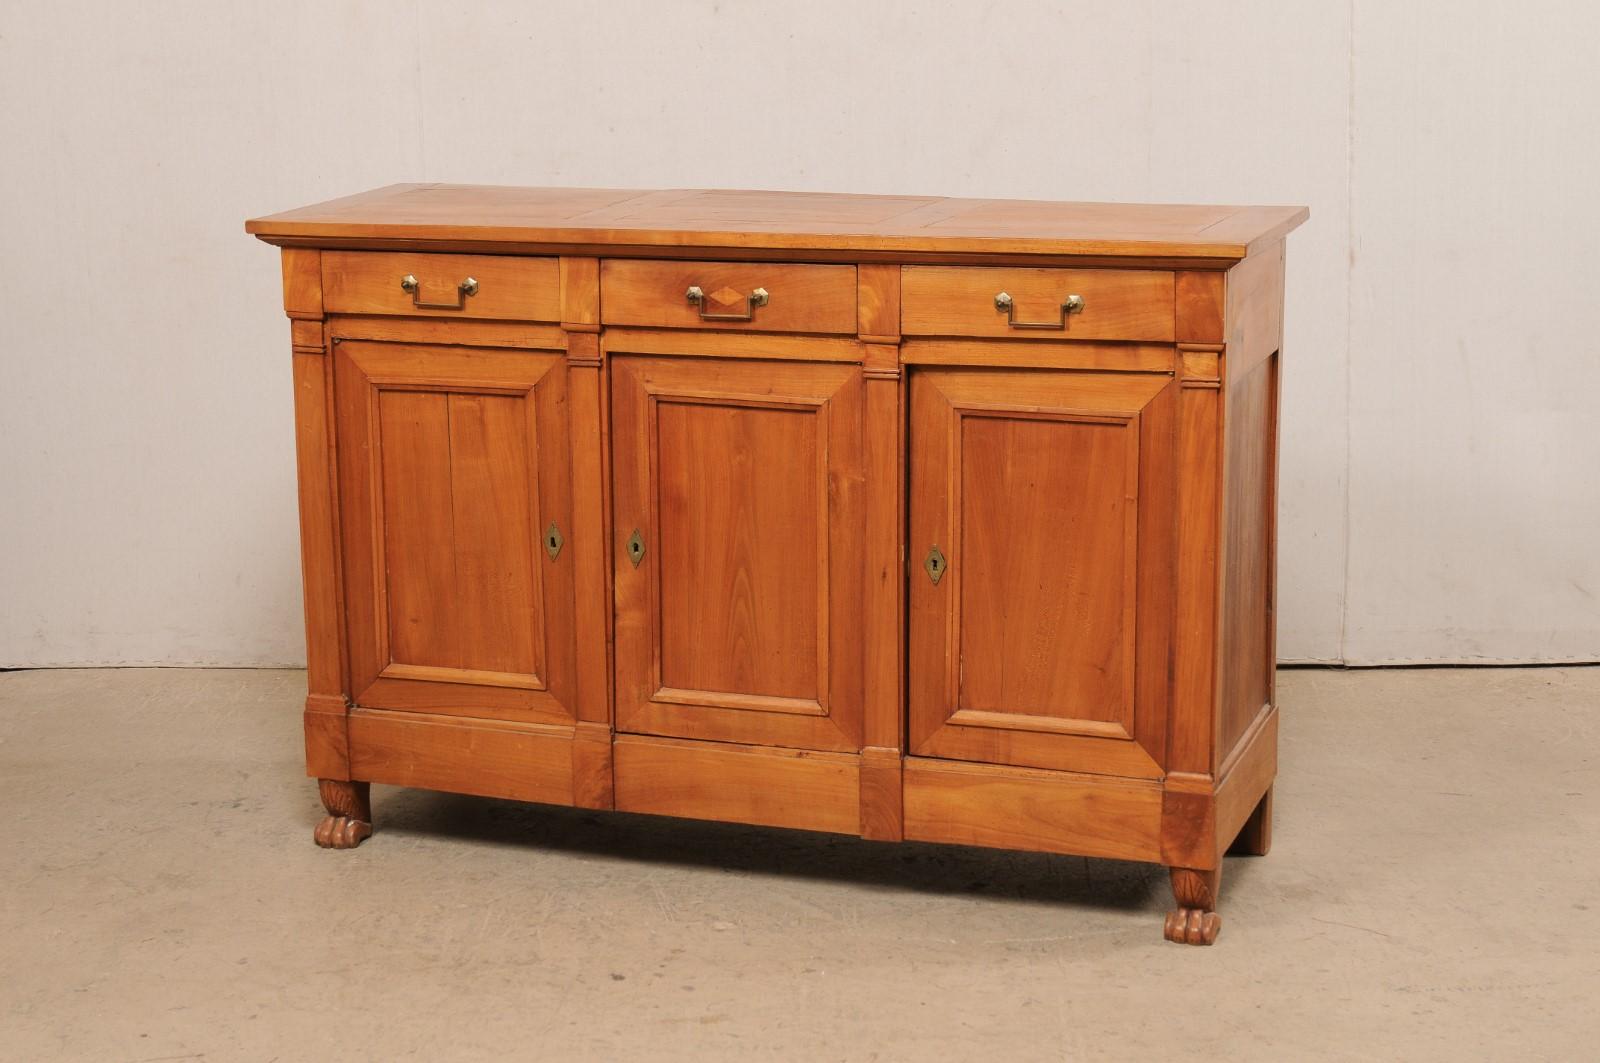 A French wooden credenza on paw feet from the early 19th century. This antique buffet from France has a rectangular-shaped top with slightly overhangs the case below, which house three dovetailed drawers adorn with brass rectangular-pull hardware,